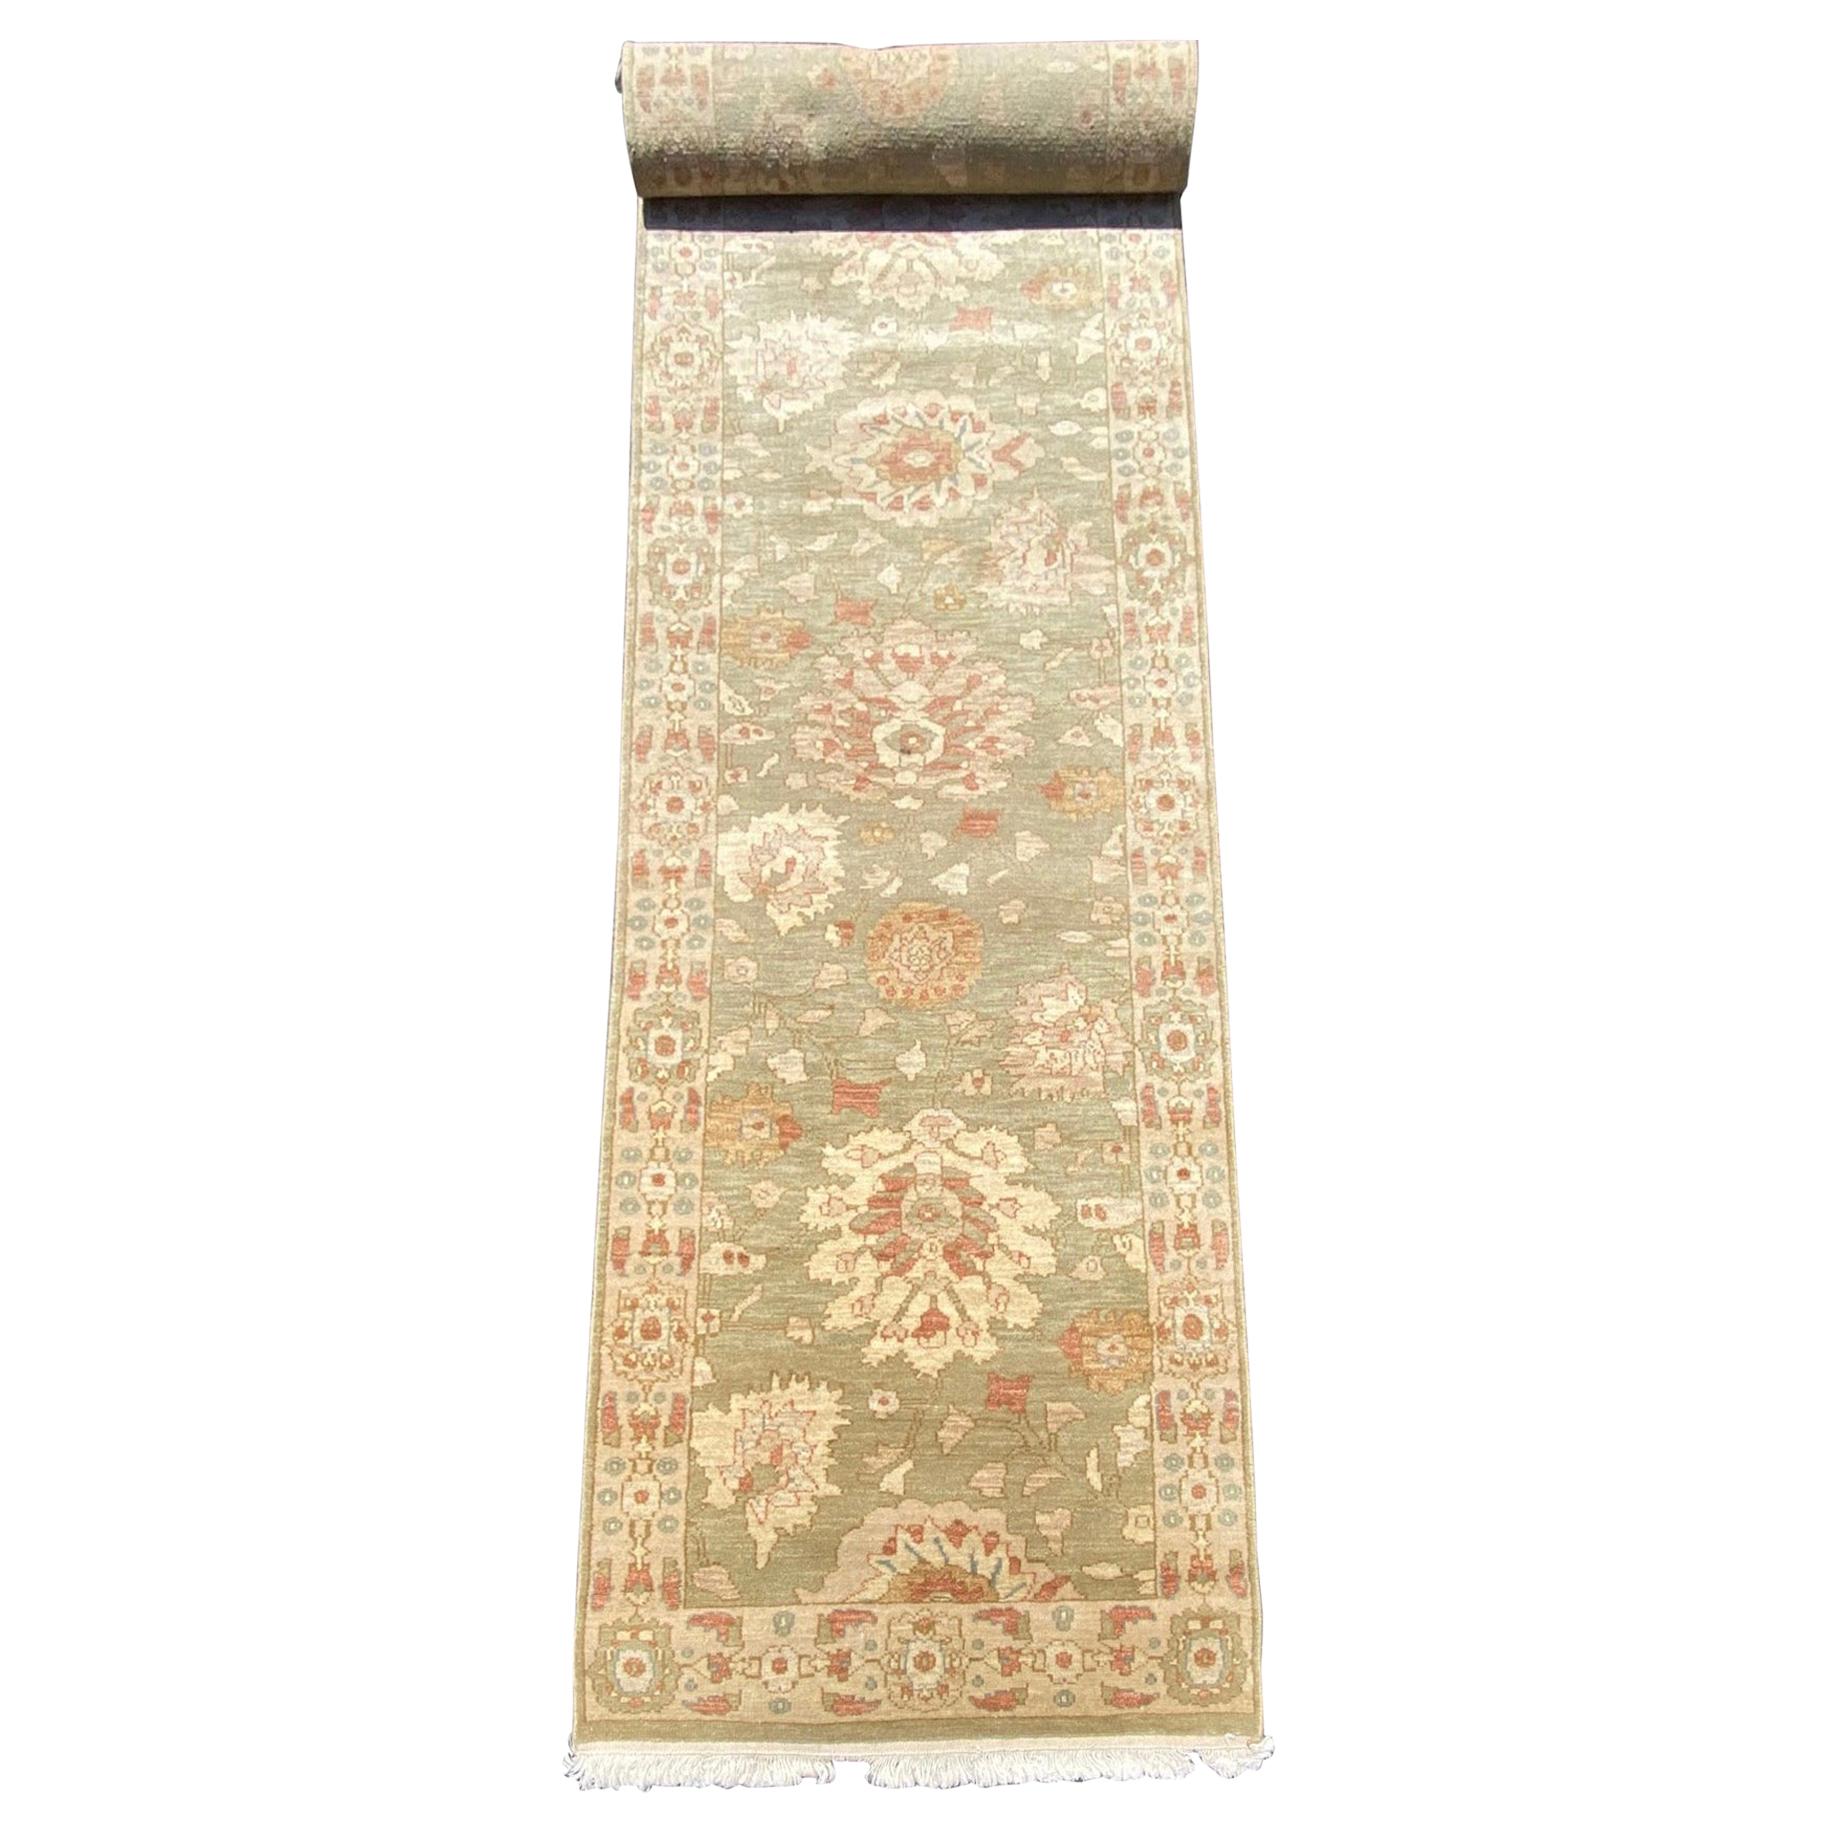 New Green Ivory Floral Persian Style Narrow Runner Rug 3 x 10.3 ft. For Sale